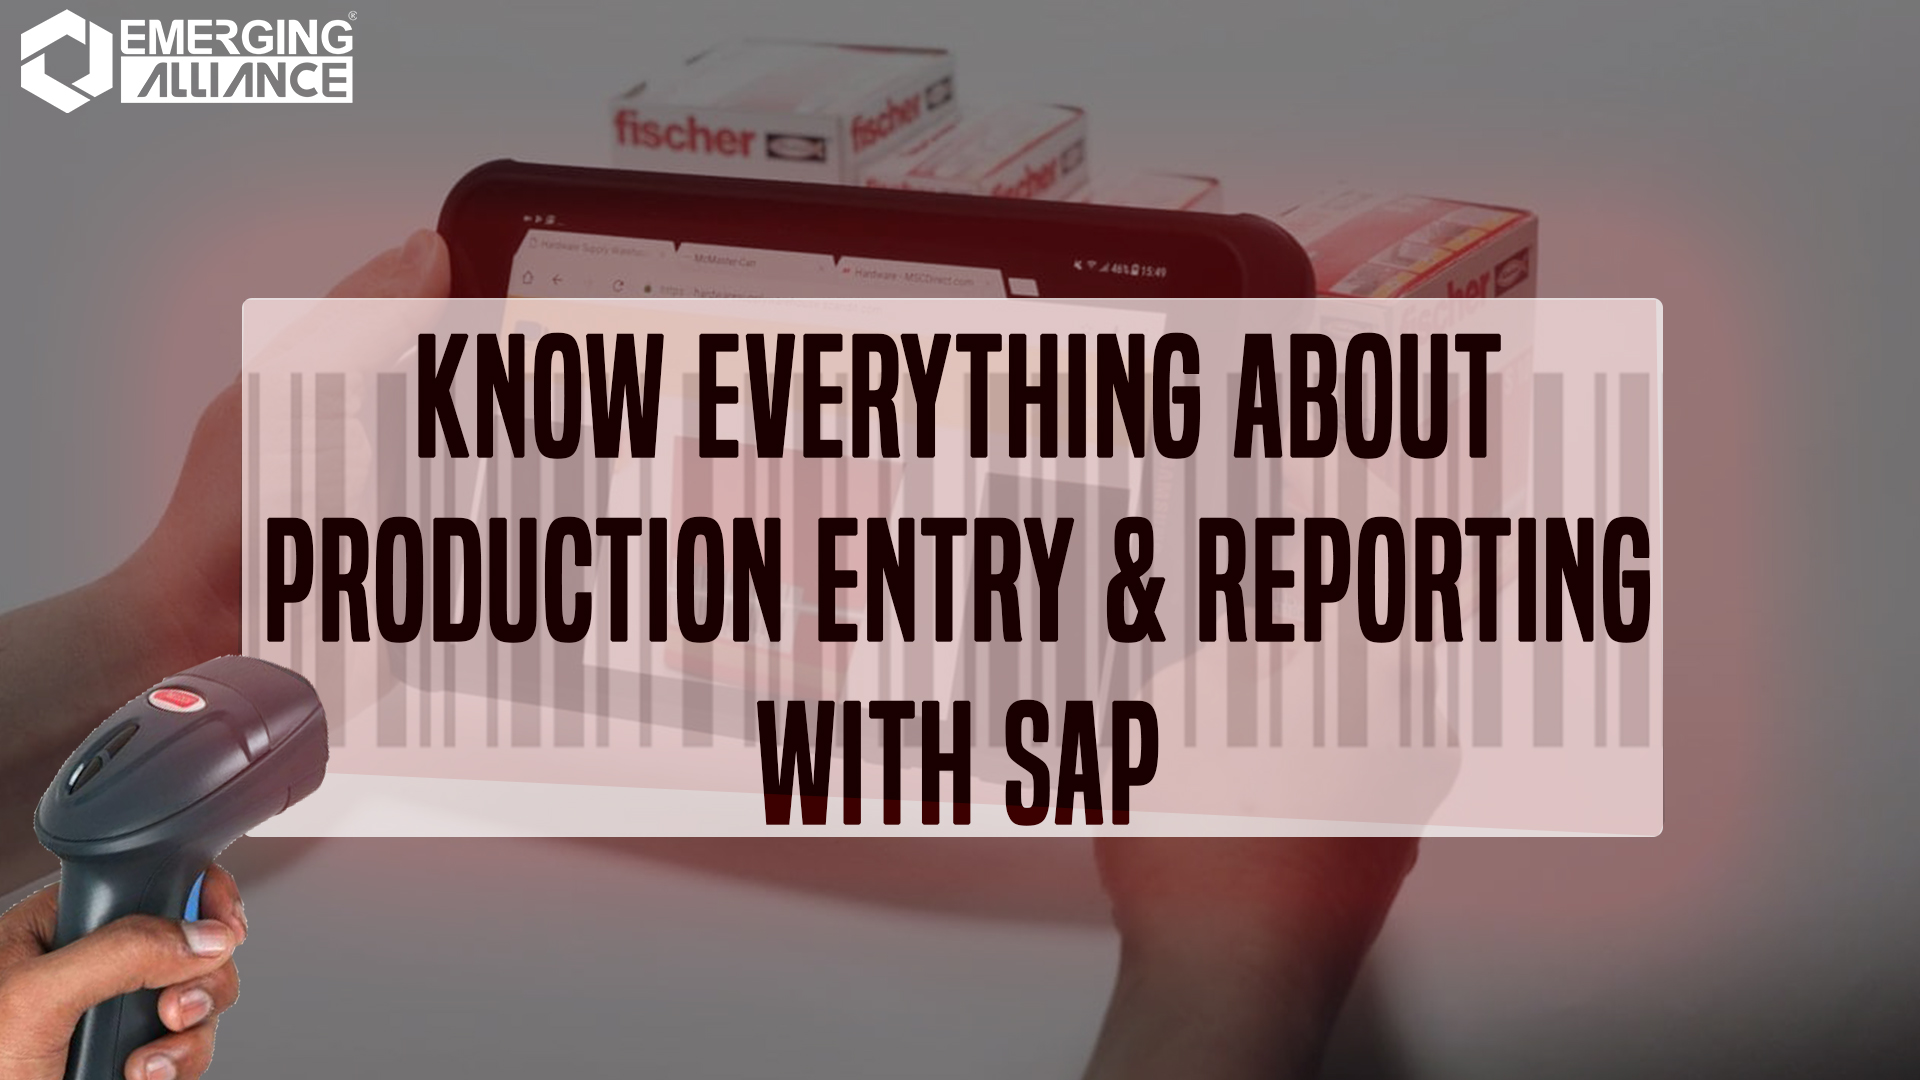 SAP Software for Production Entry & Reporting